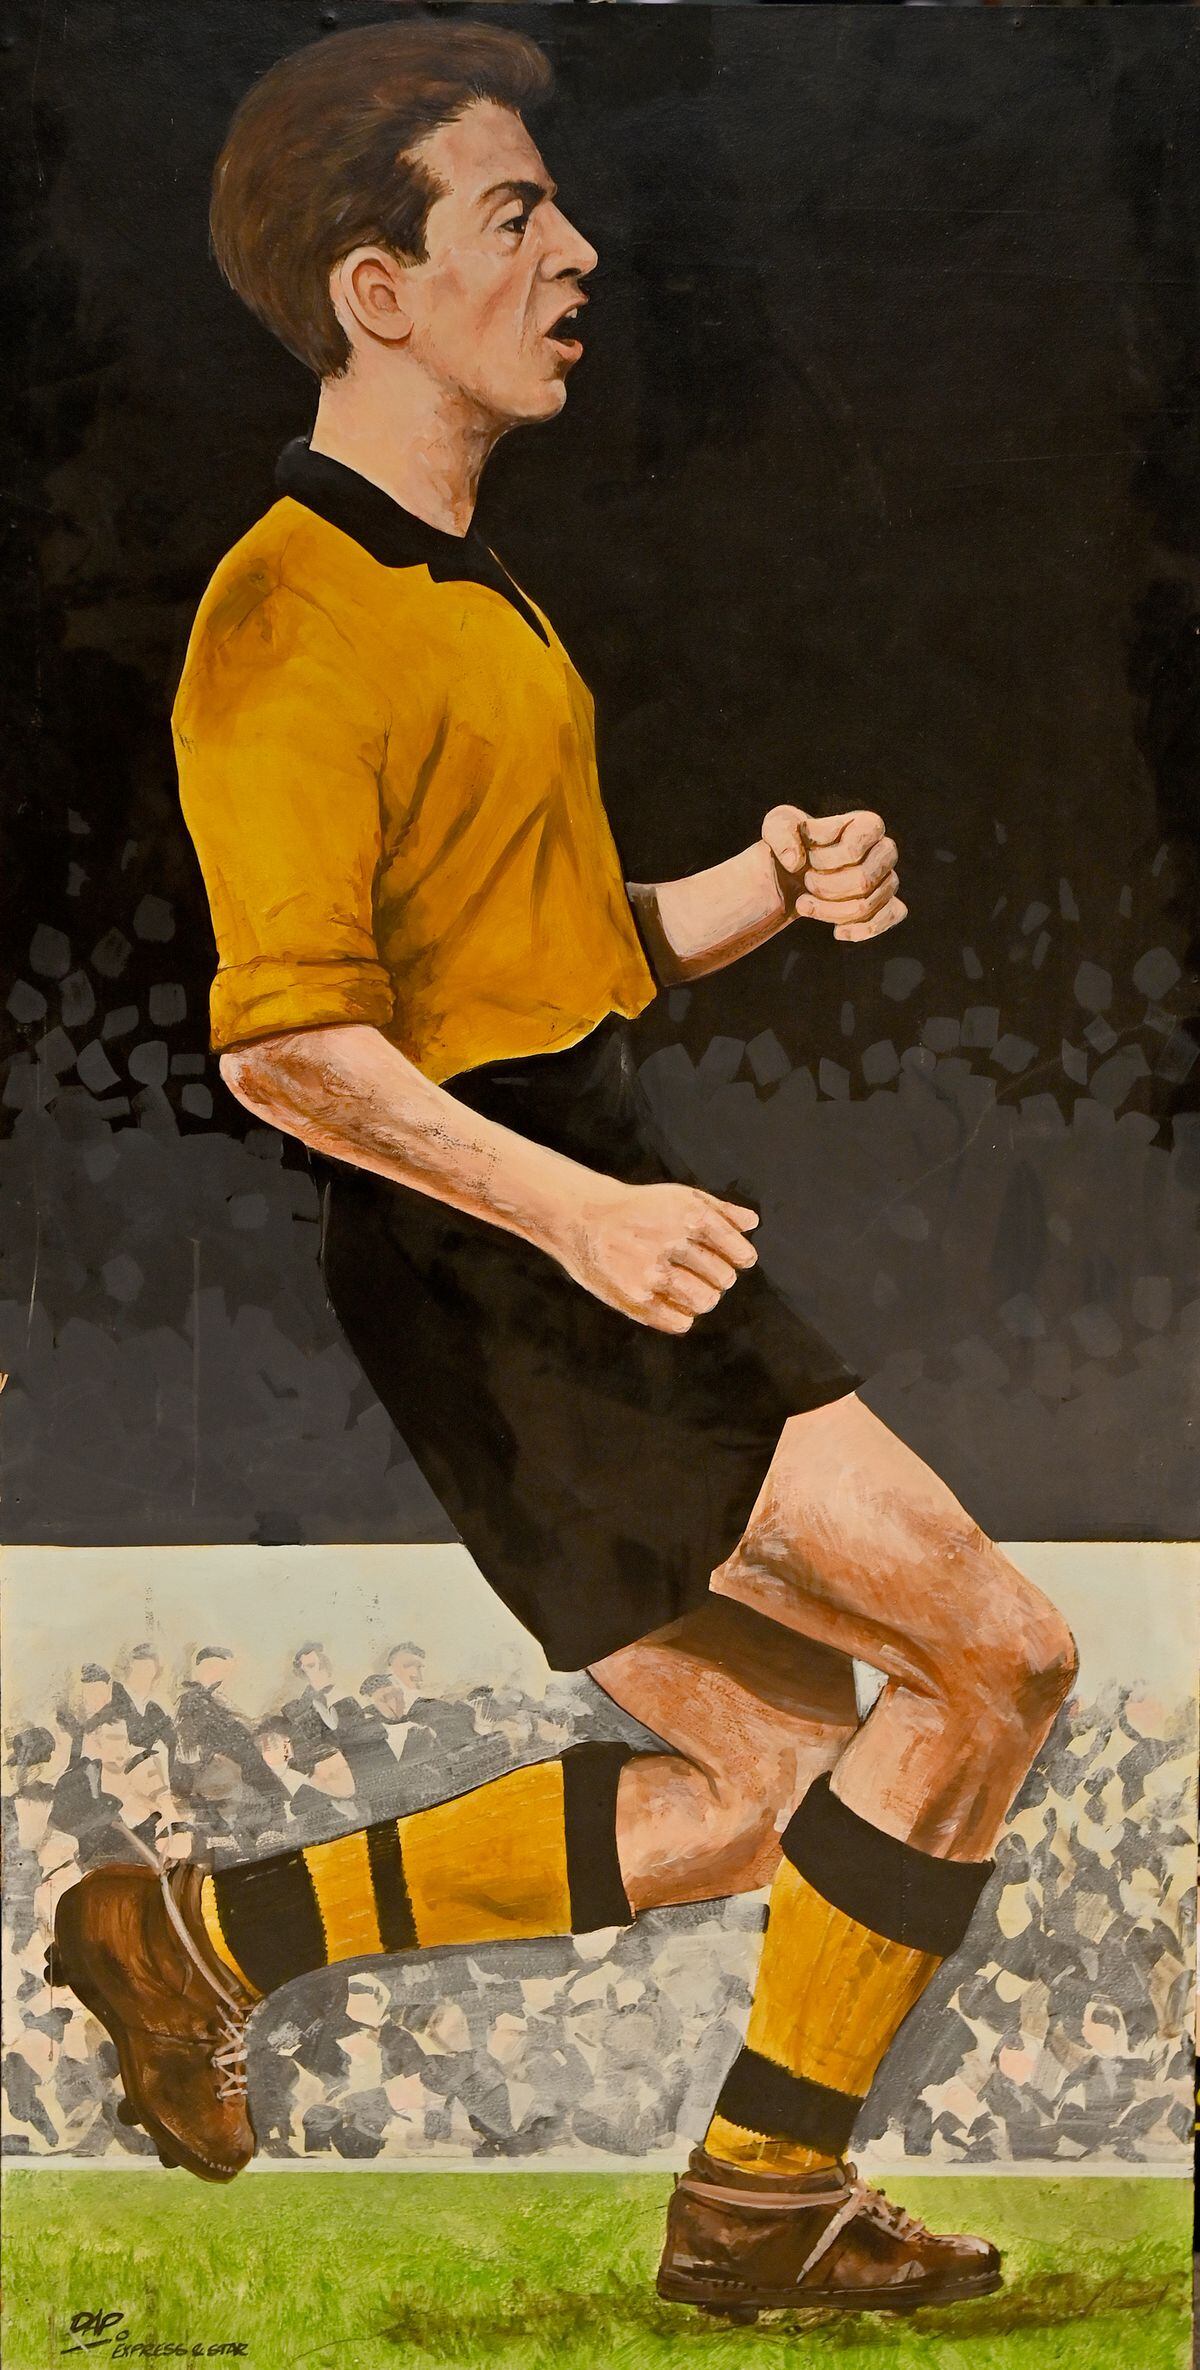 Peter Broadbent was part of the championship-winning Wolves side of the 1950s